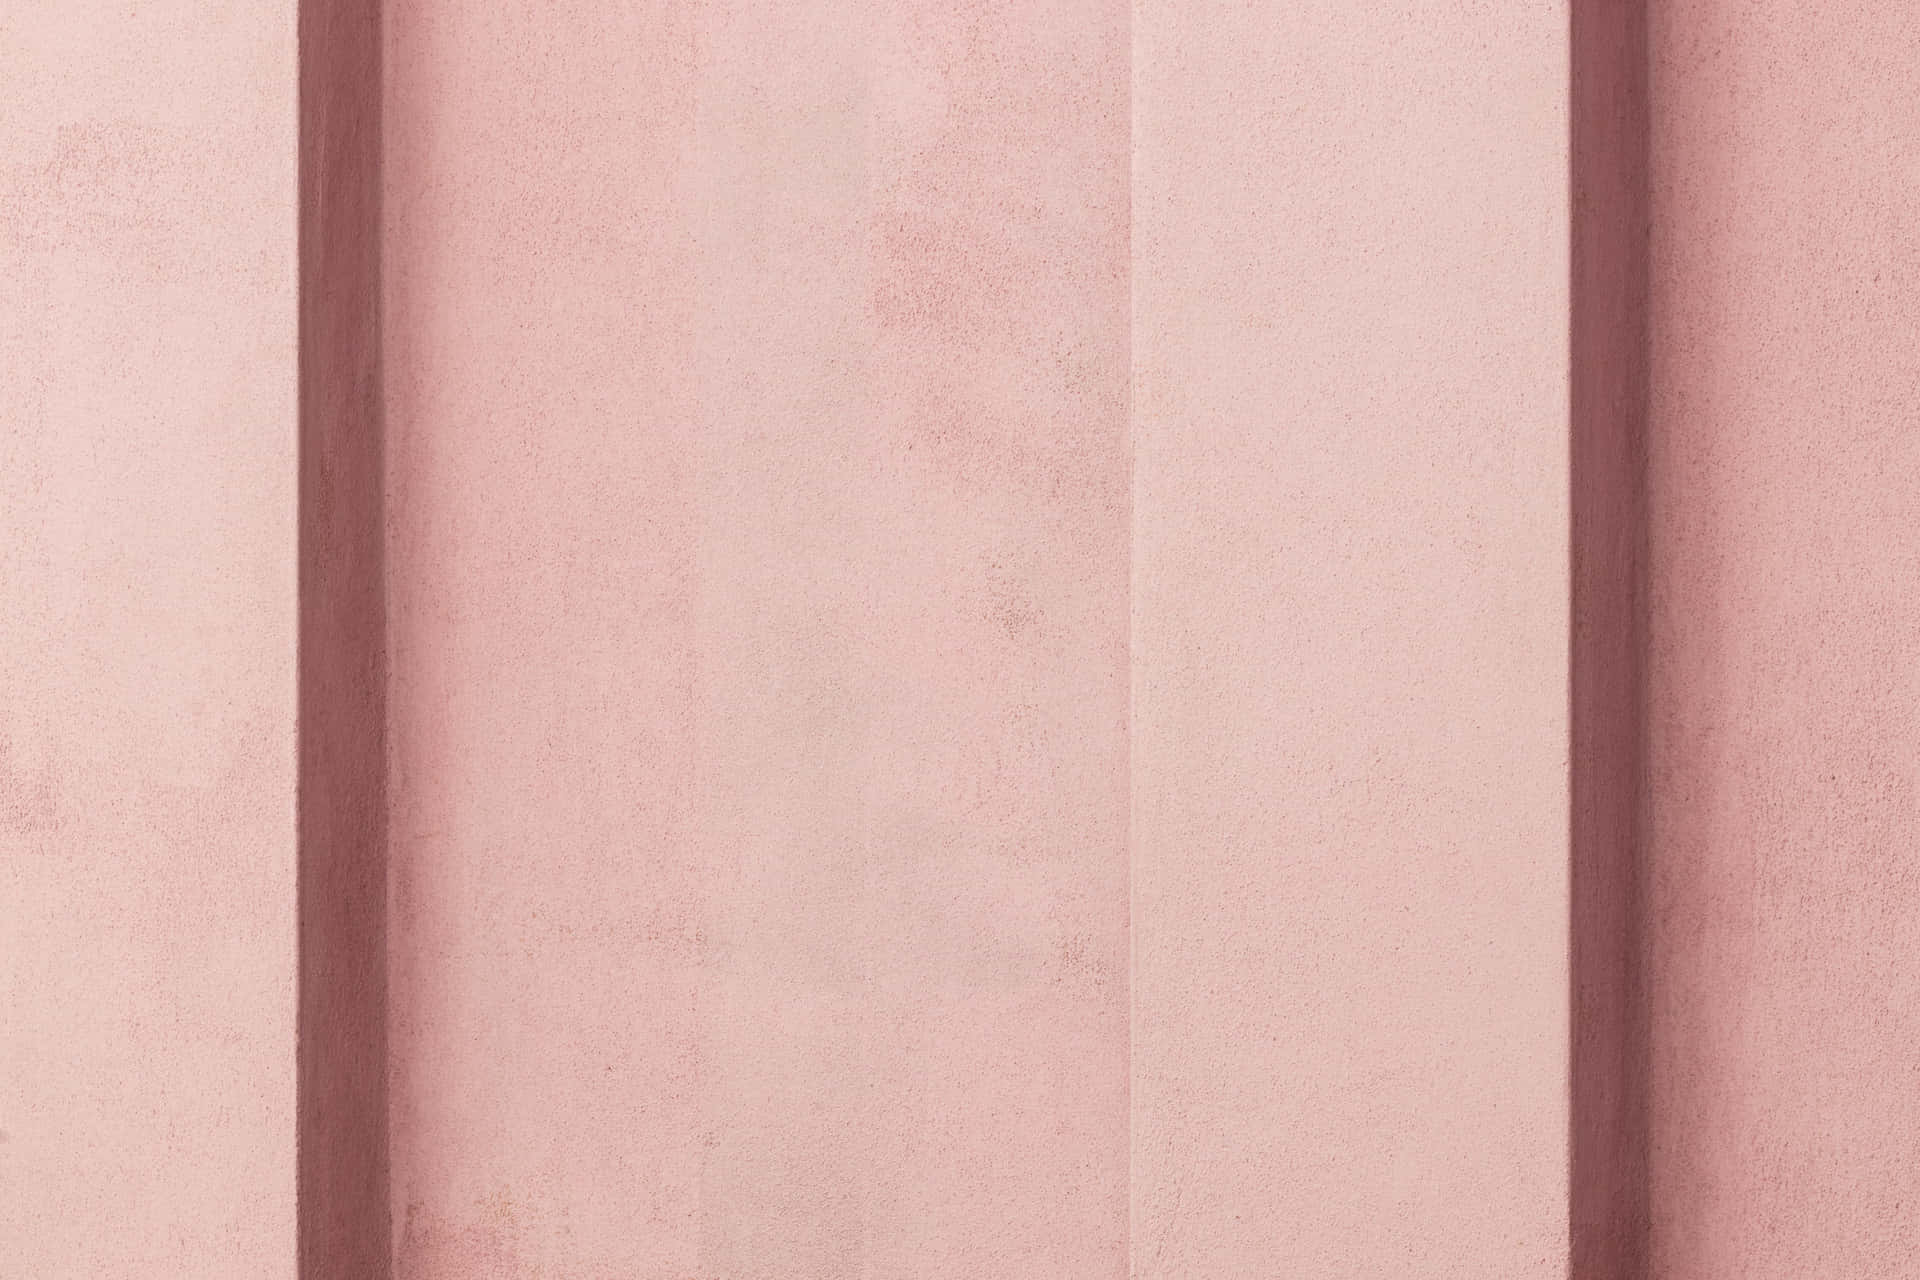 Add a subtle touch of color to your project with a soft pink background.